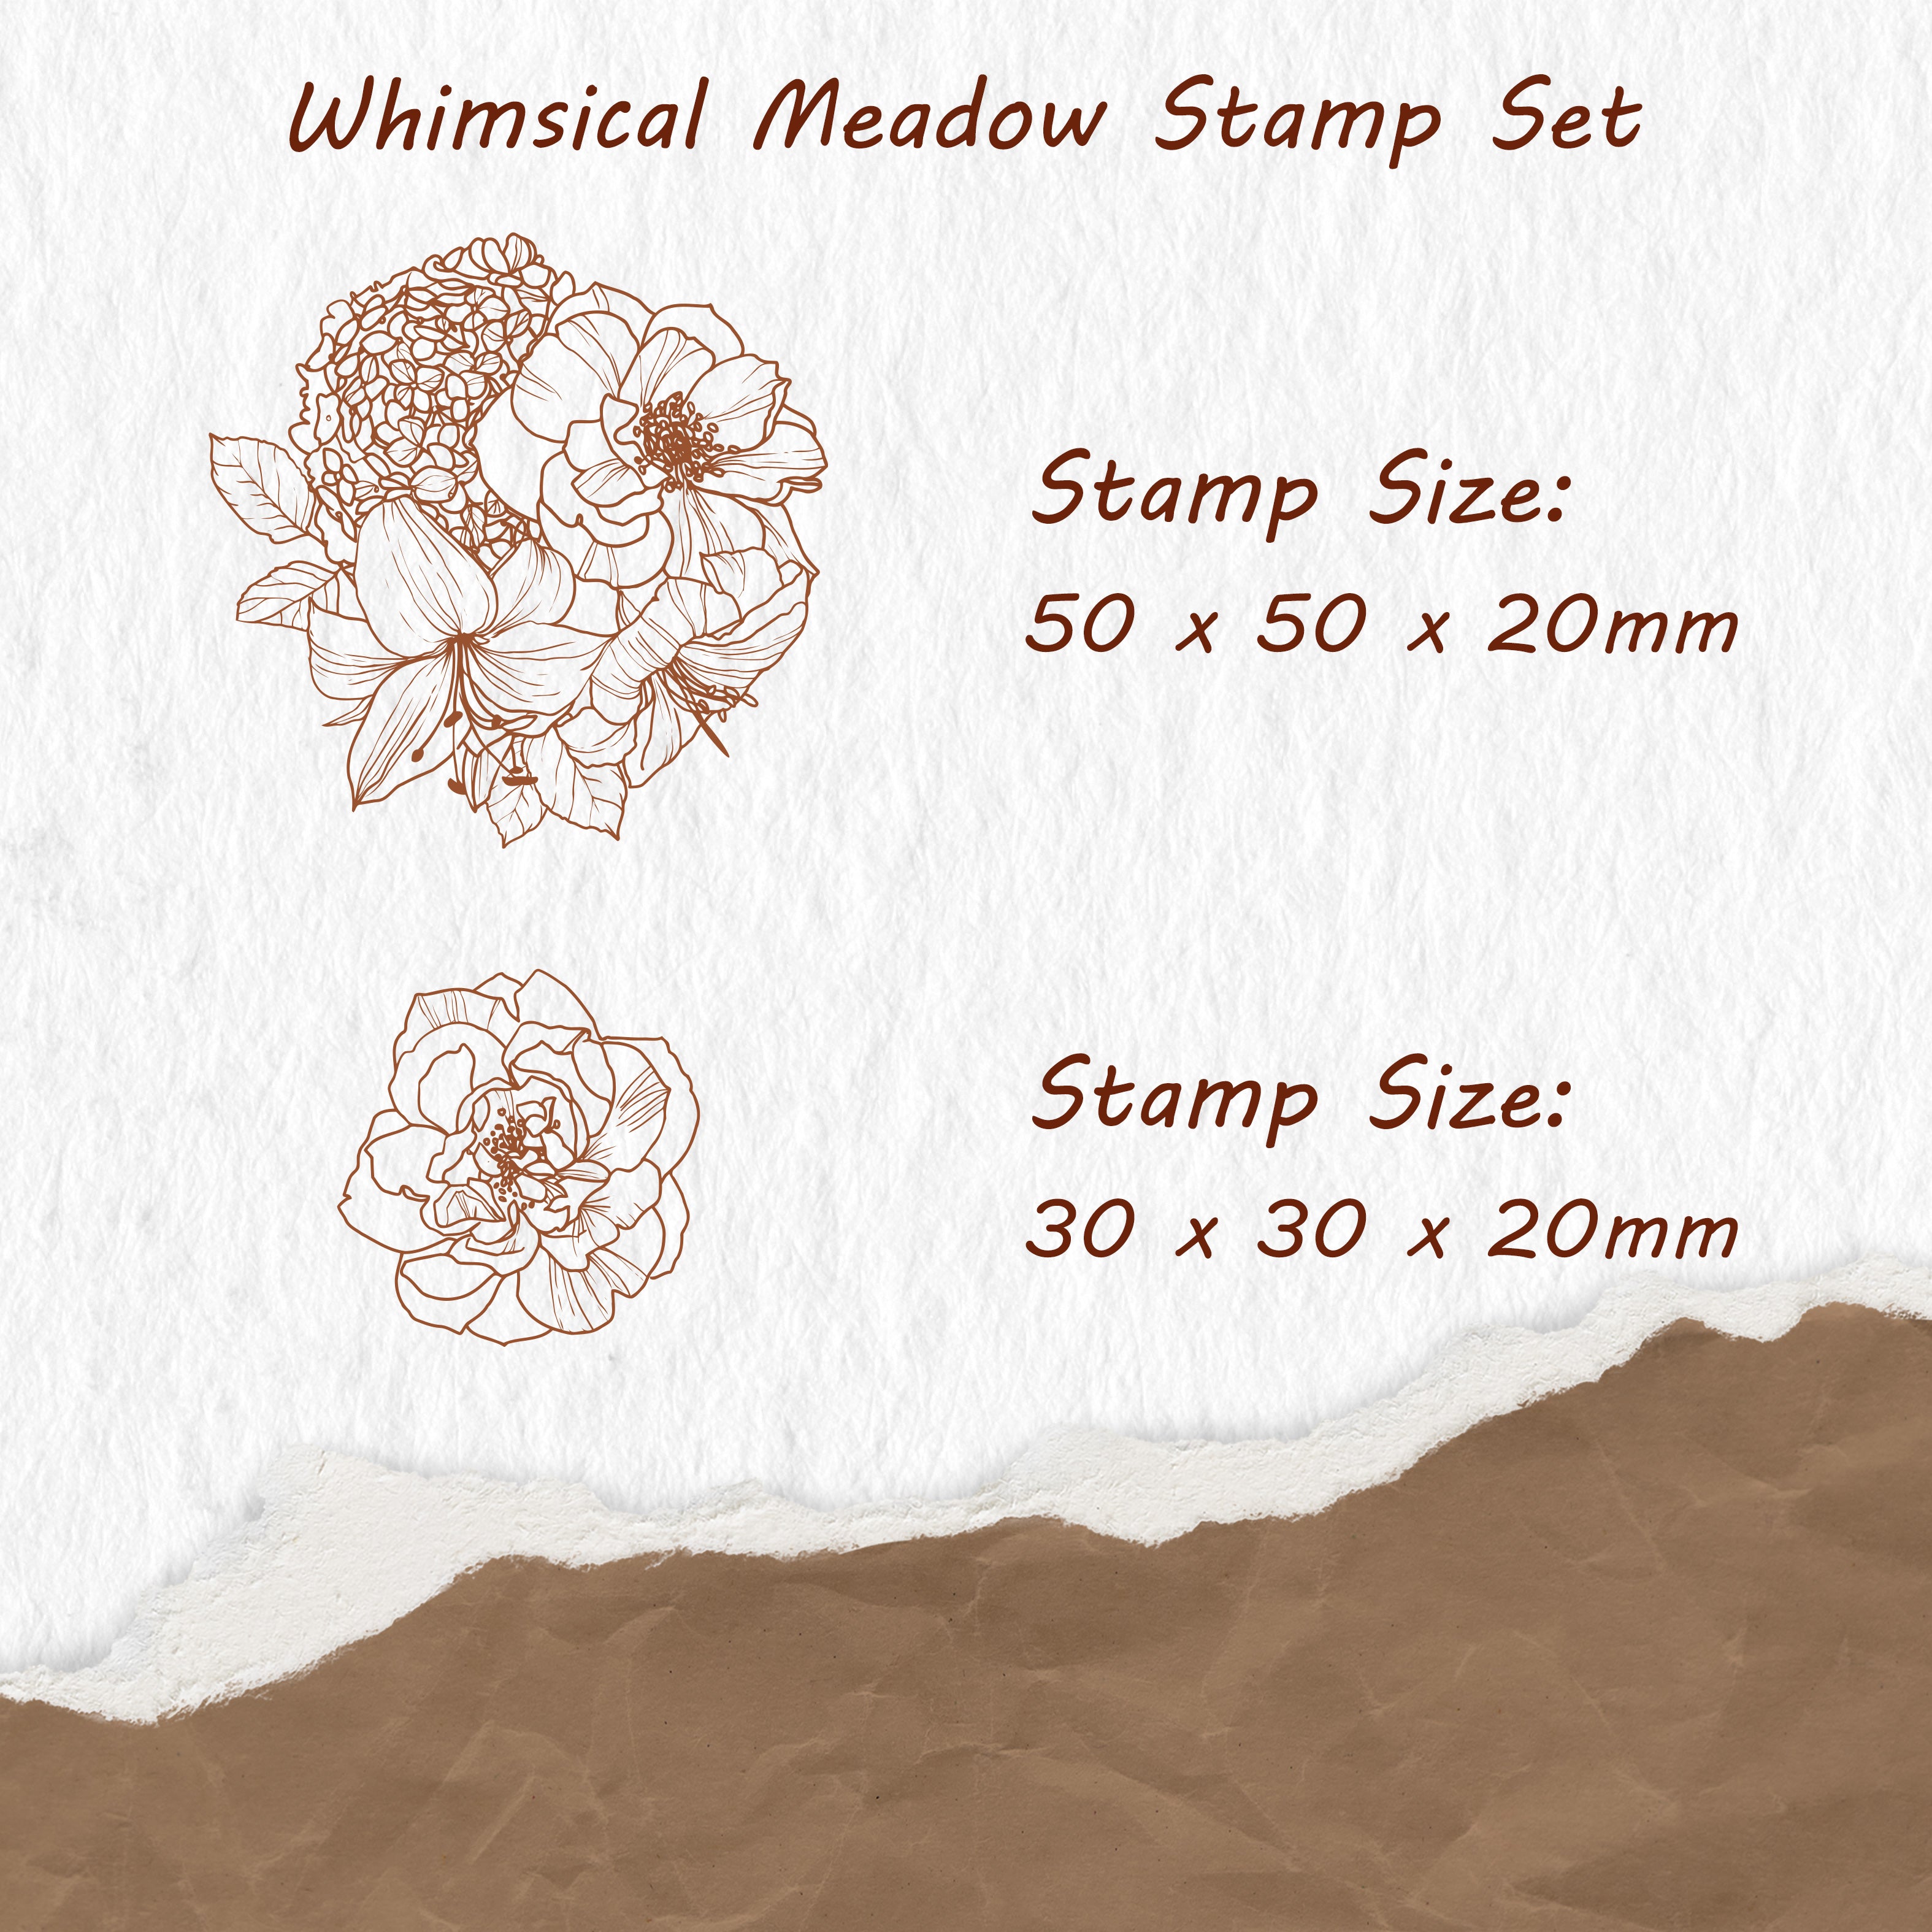 Whimsical Meadow Stamp Set | The Washi Tape Shop. Beautiful Washi and Decorative Tape For Bullet Journals, Gift Wrapping, Planner Decoration and DIY Projects